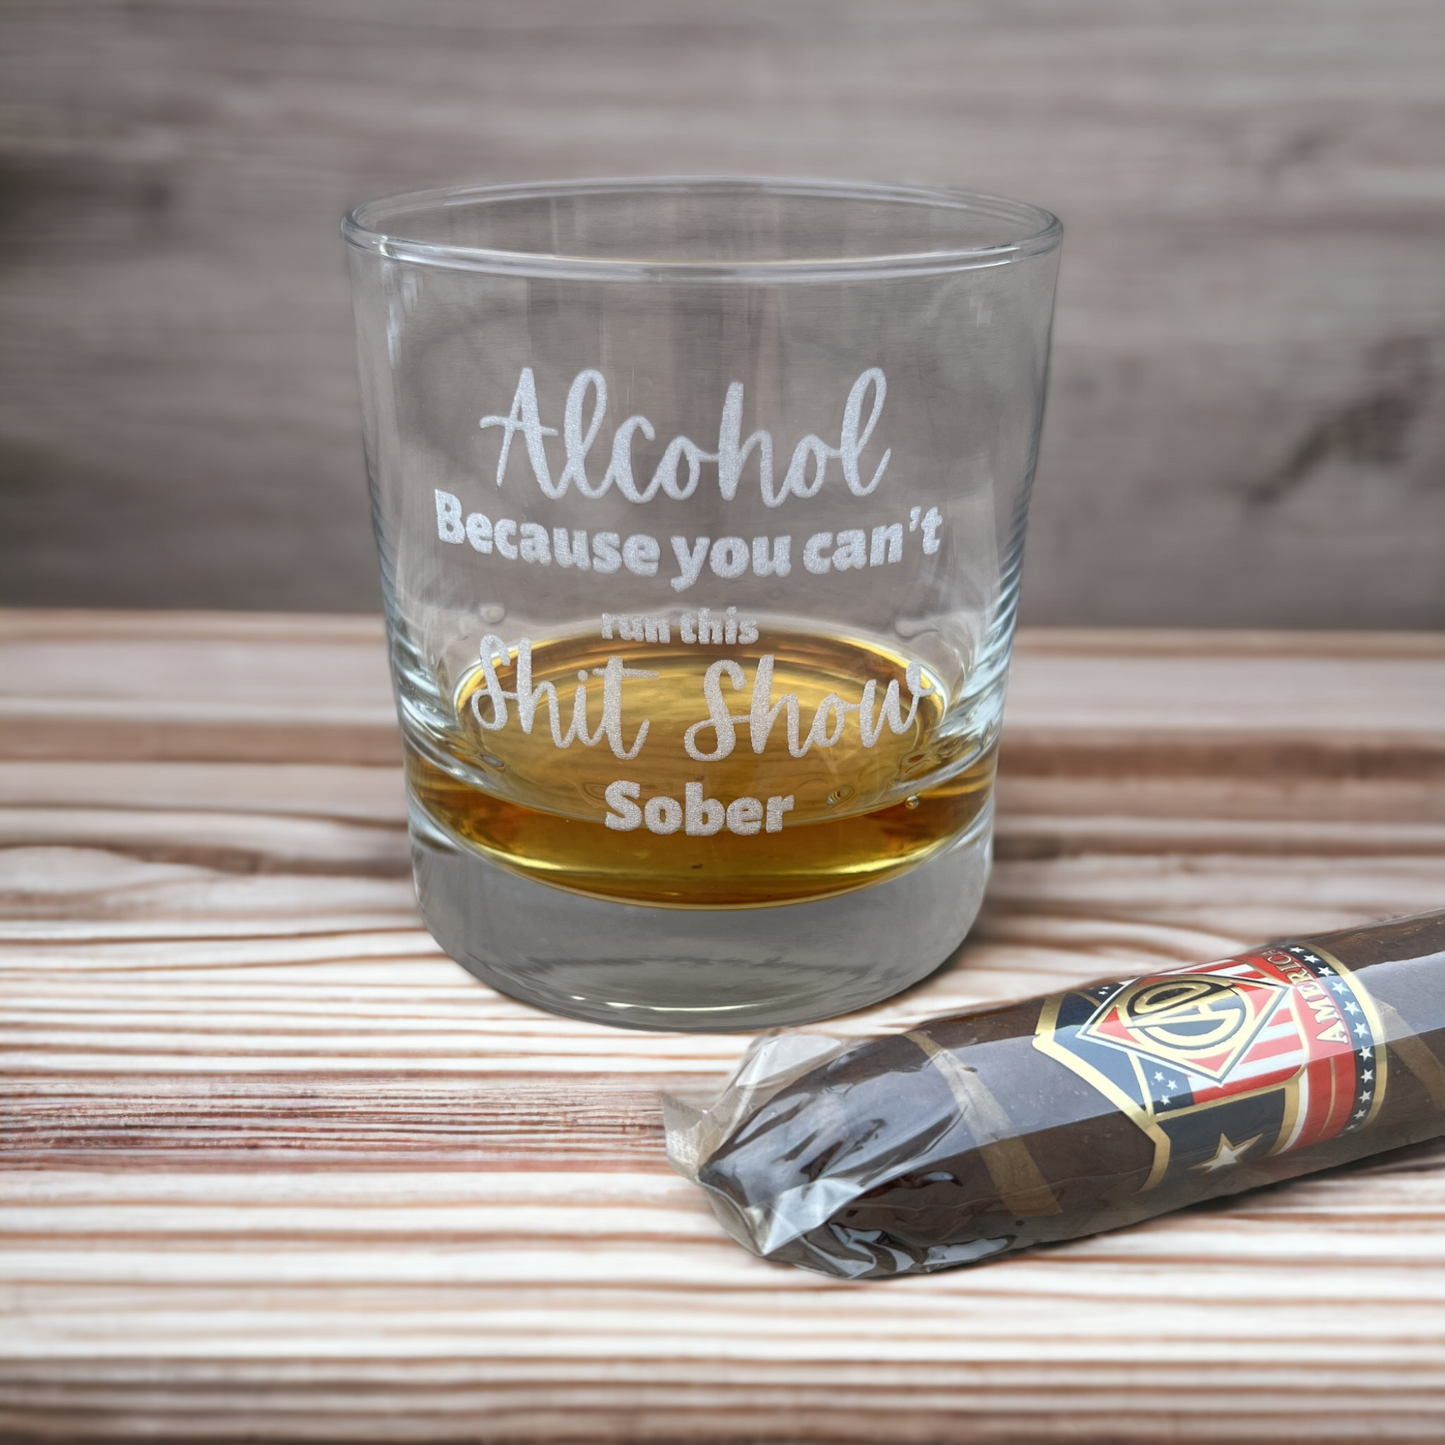 Alcohol Because You Can't Run this Shit Show Sober - Engraved Whiskey Glass